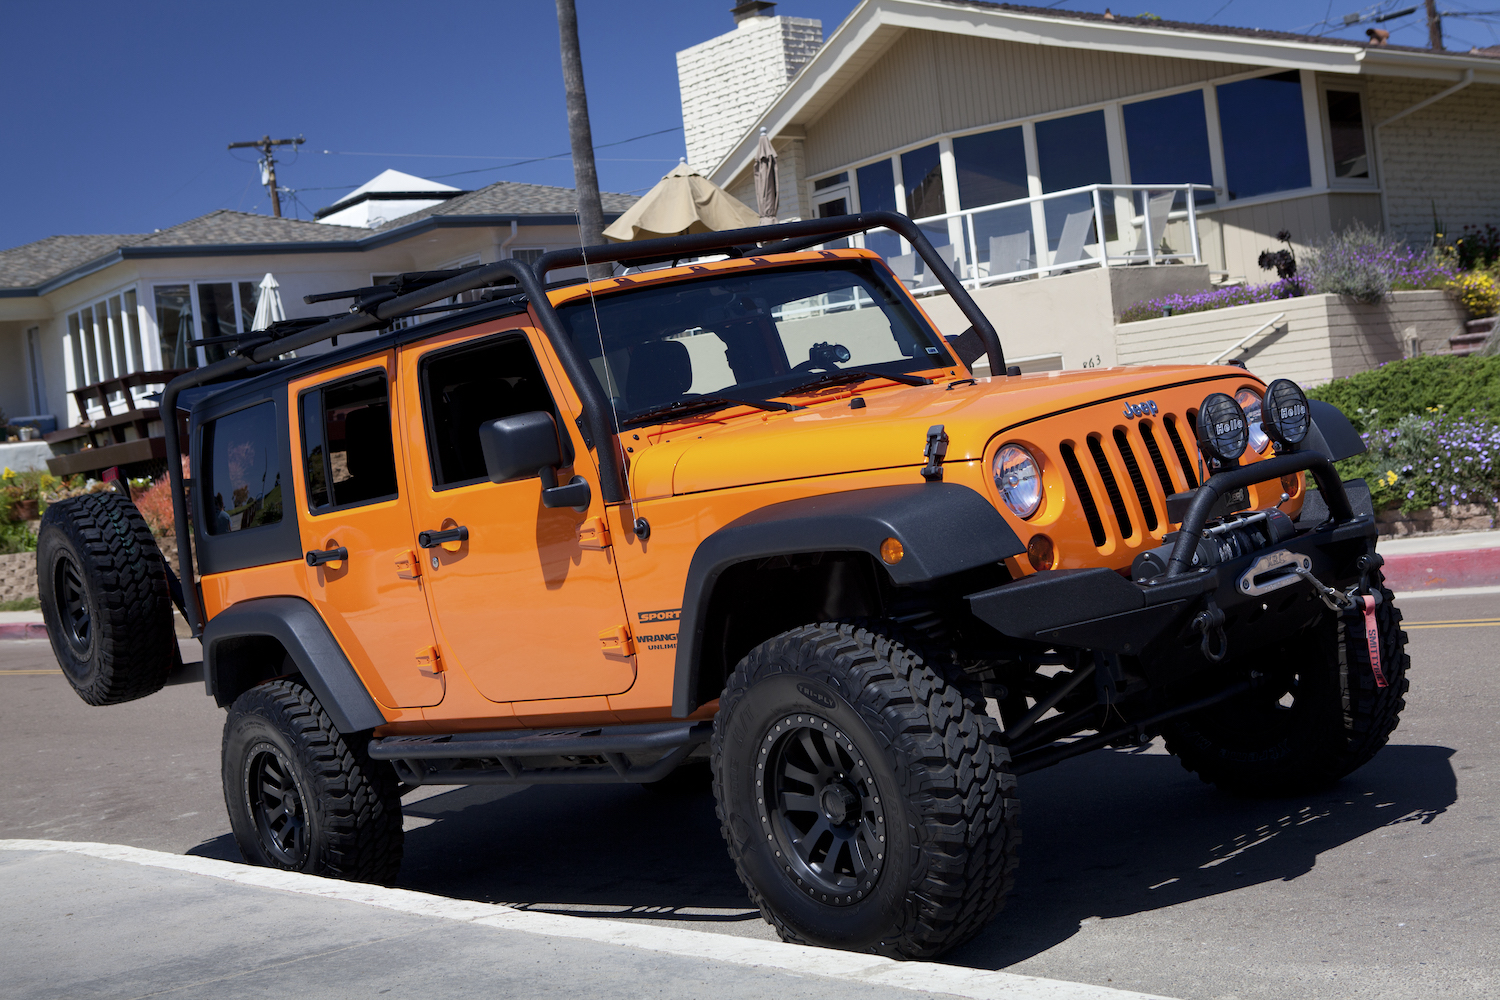 An orange Jeep Wrangler, LeBron James is one of the world's richest celebrities and once owned a Jeep Wrangler